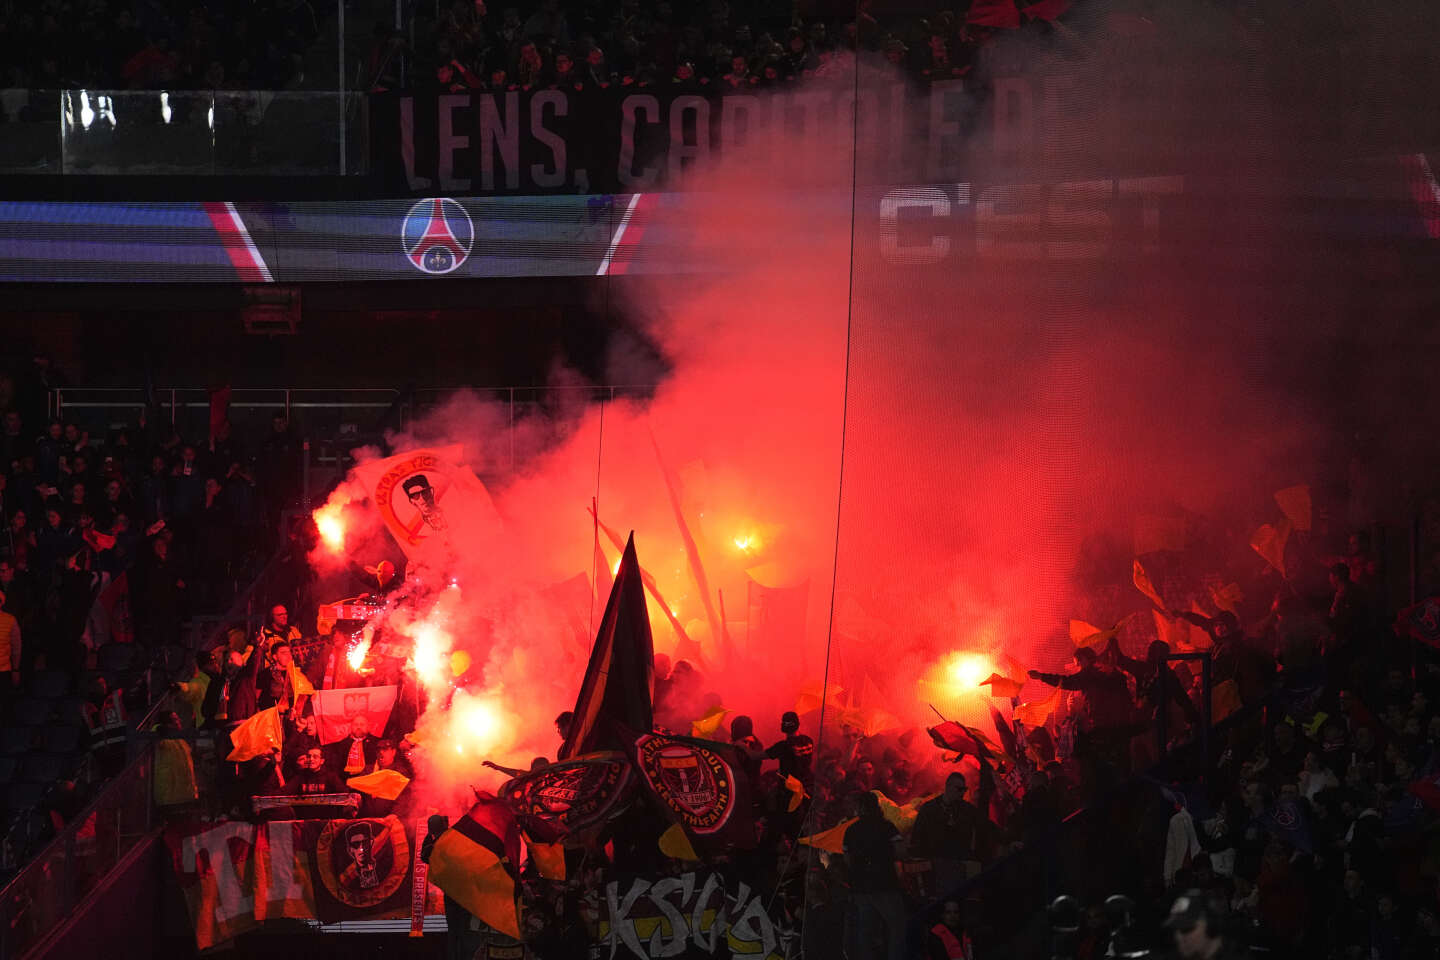 the club’s ultras announce that they will no longer go to the Parc des Princes “until further notice”